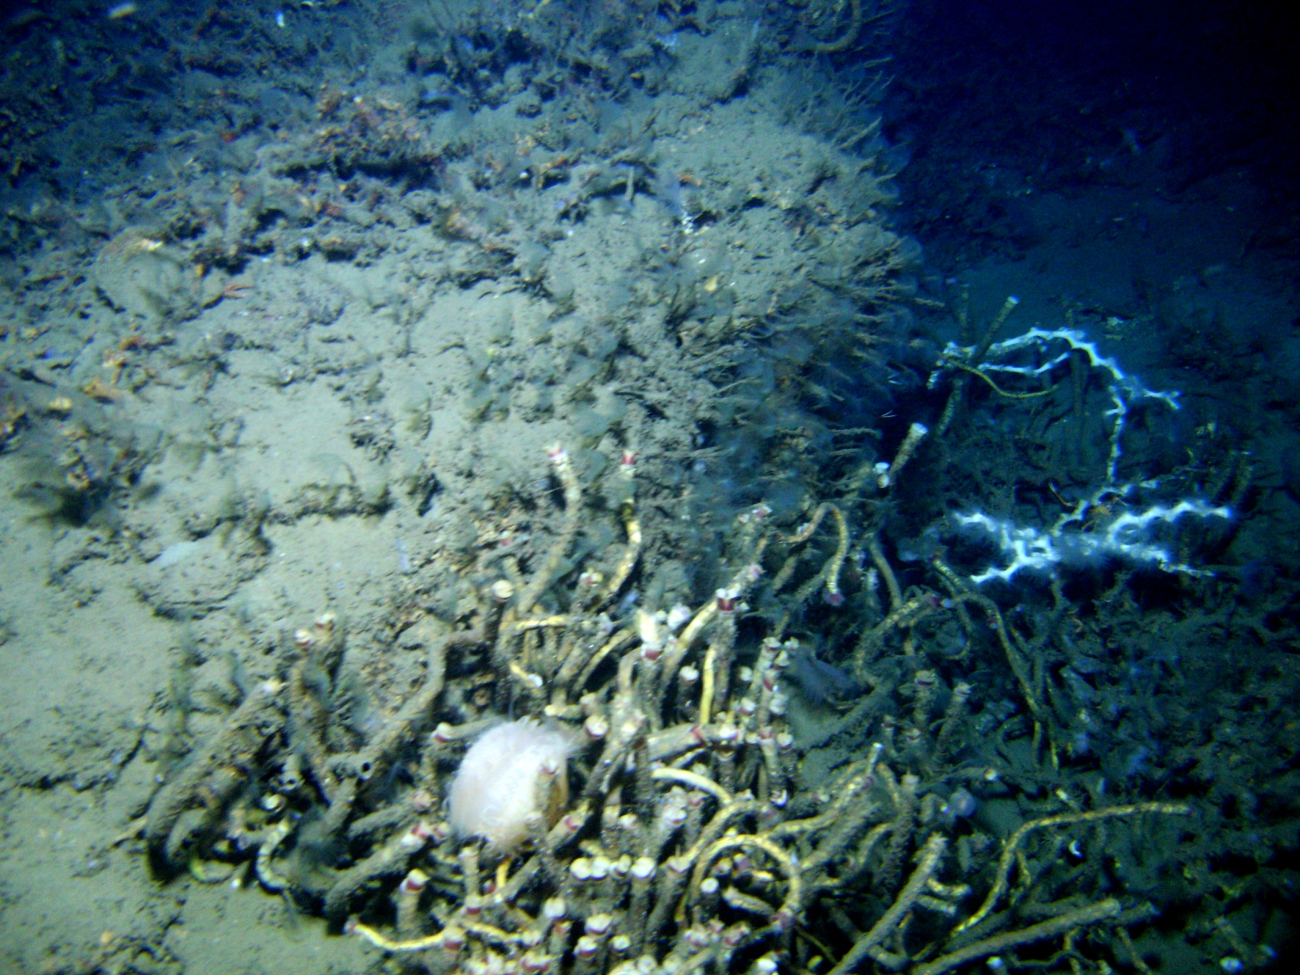 Lamellibrachian tube worms at a cold seep